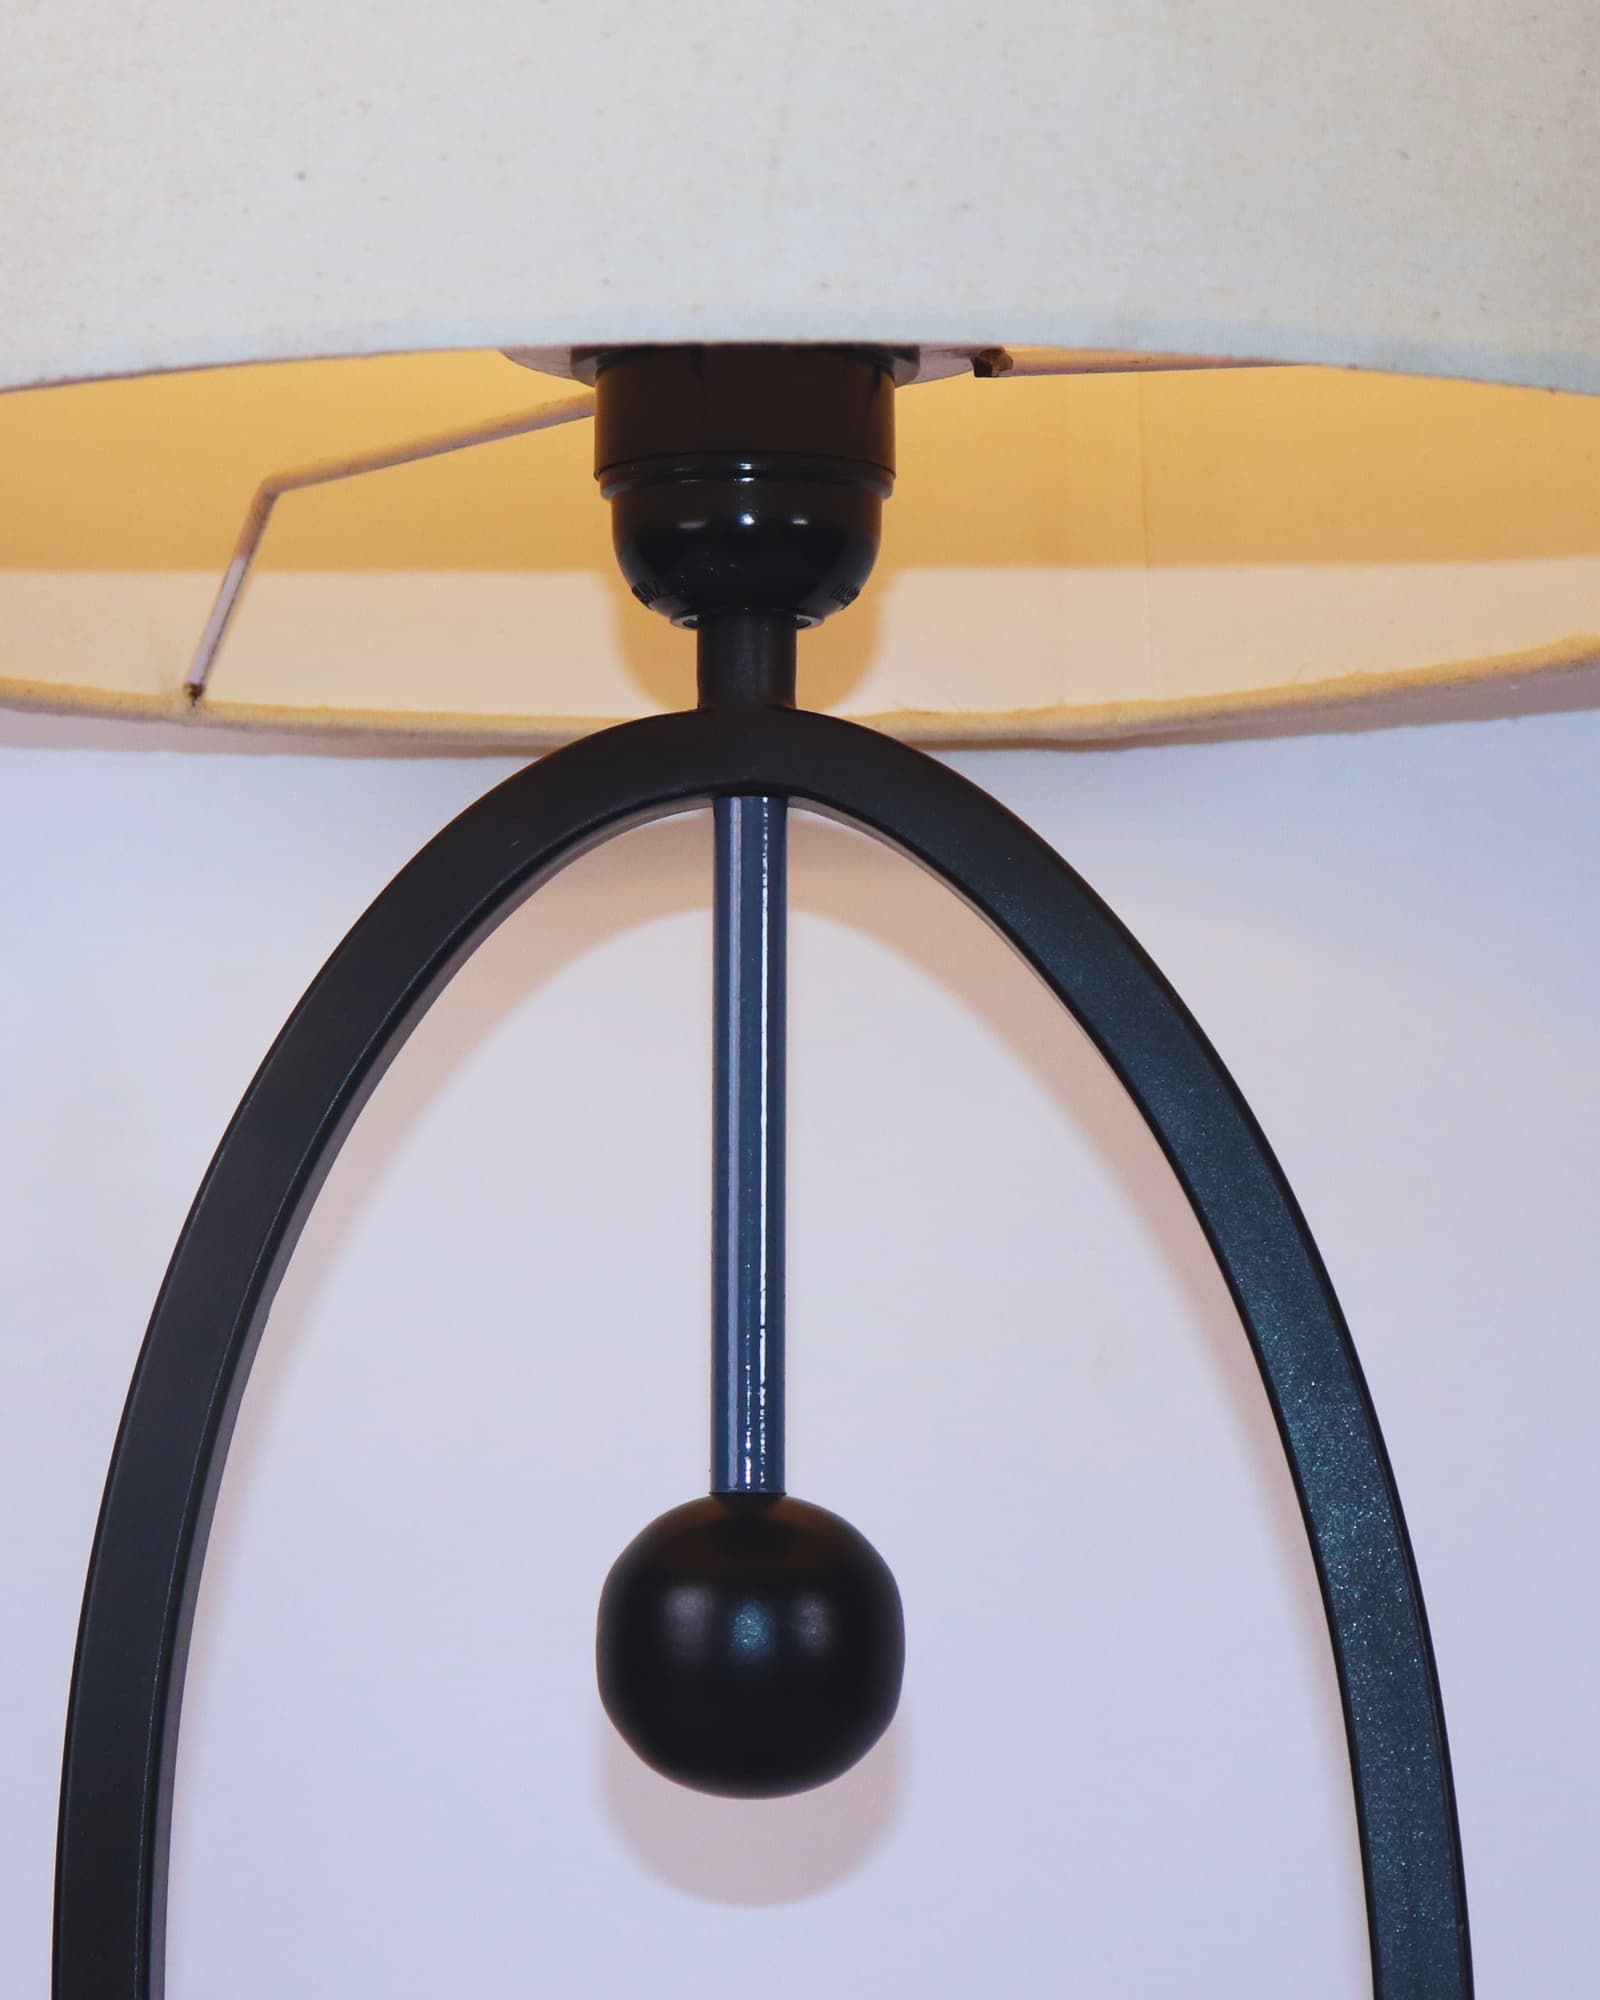 The OvalSky Table lamp